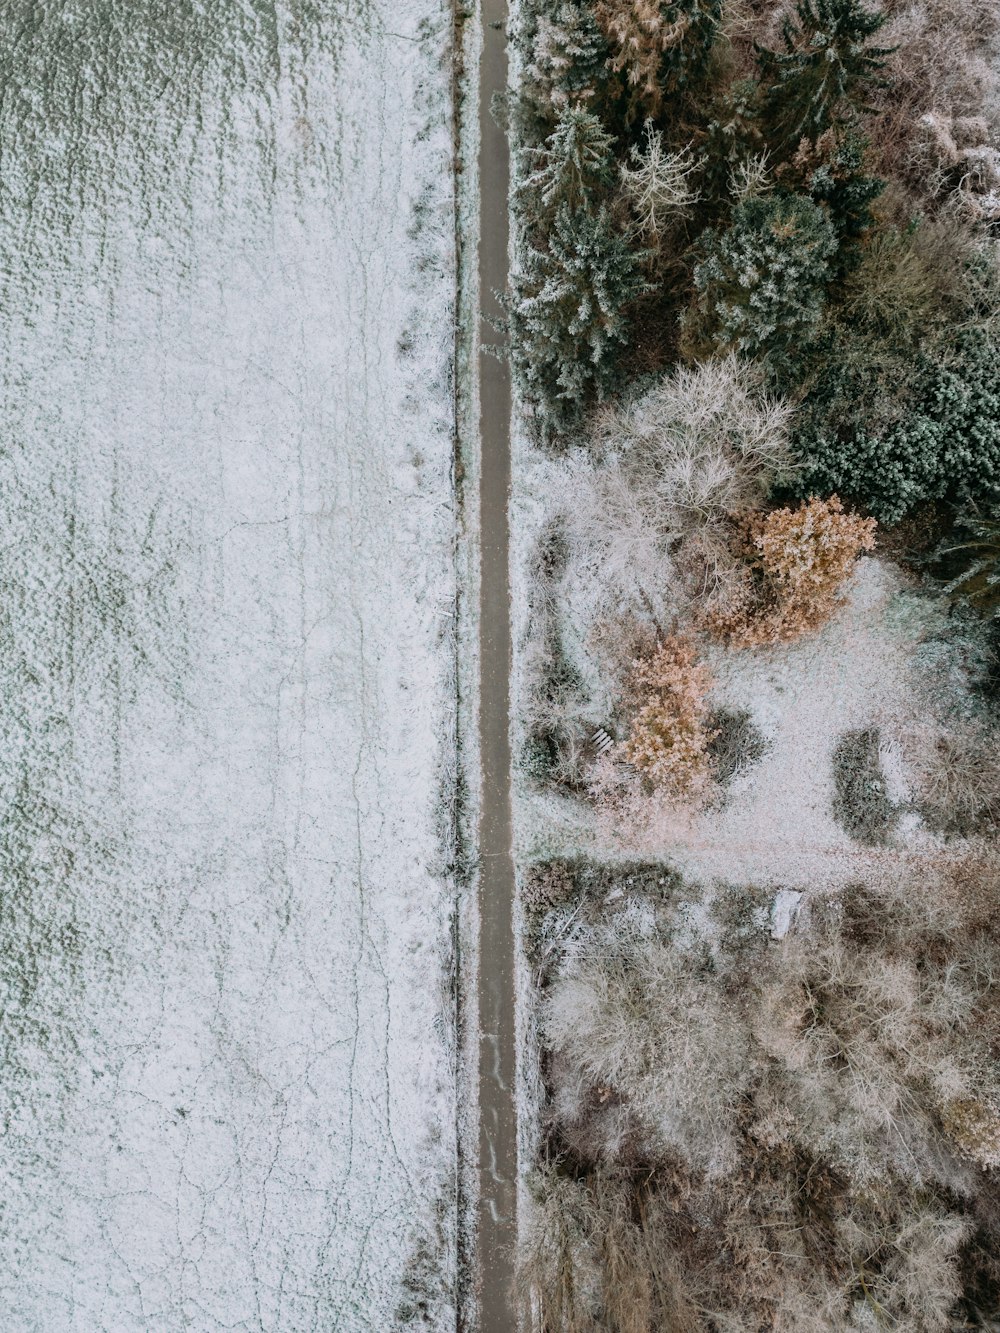 an aerial view of a snow covered road and trees